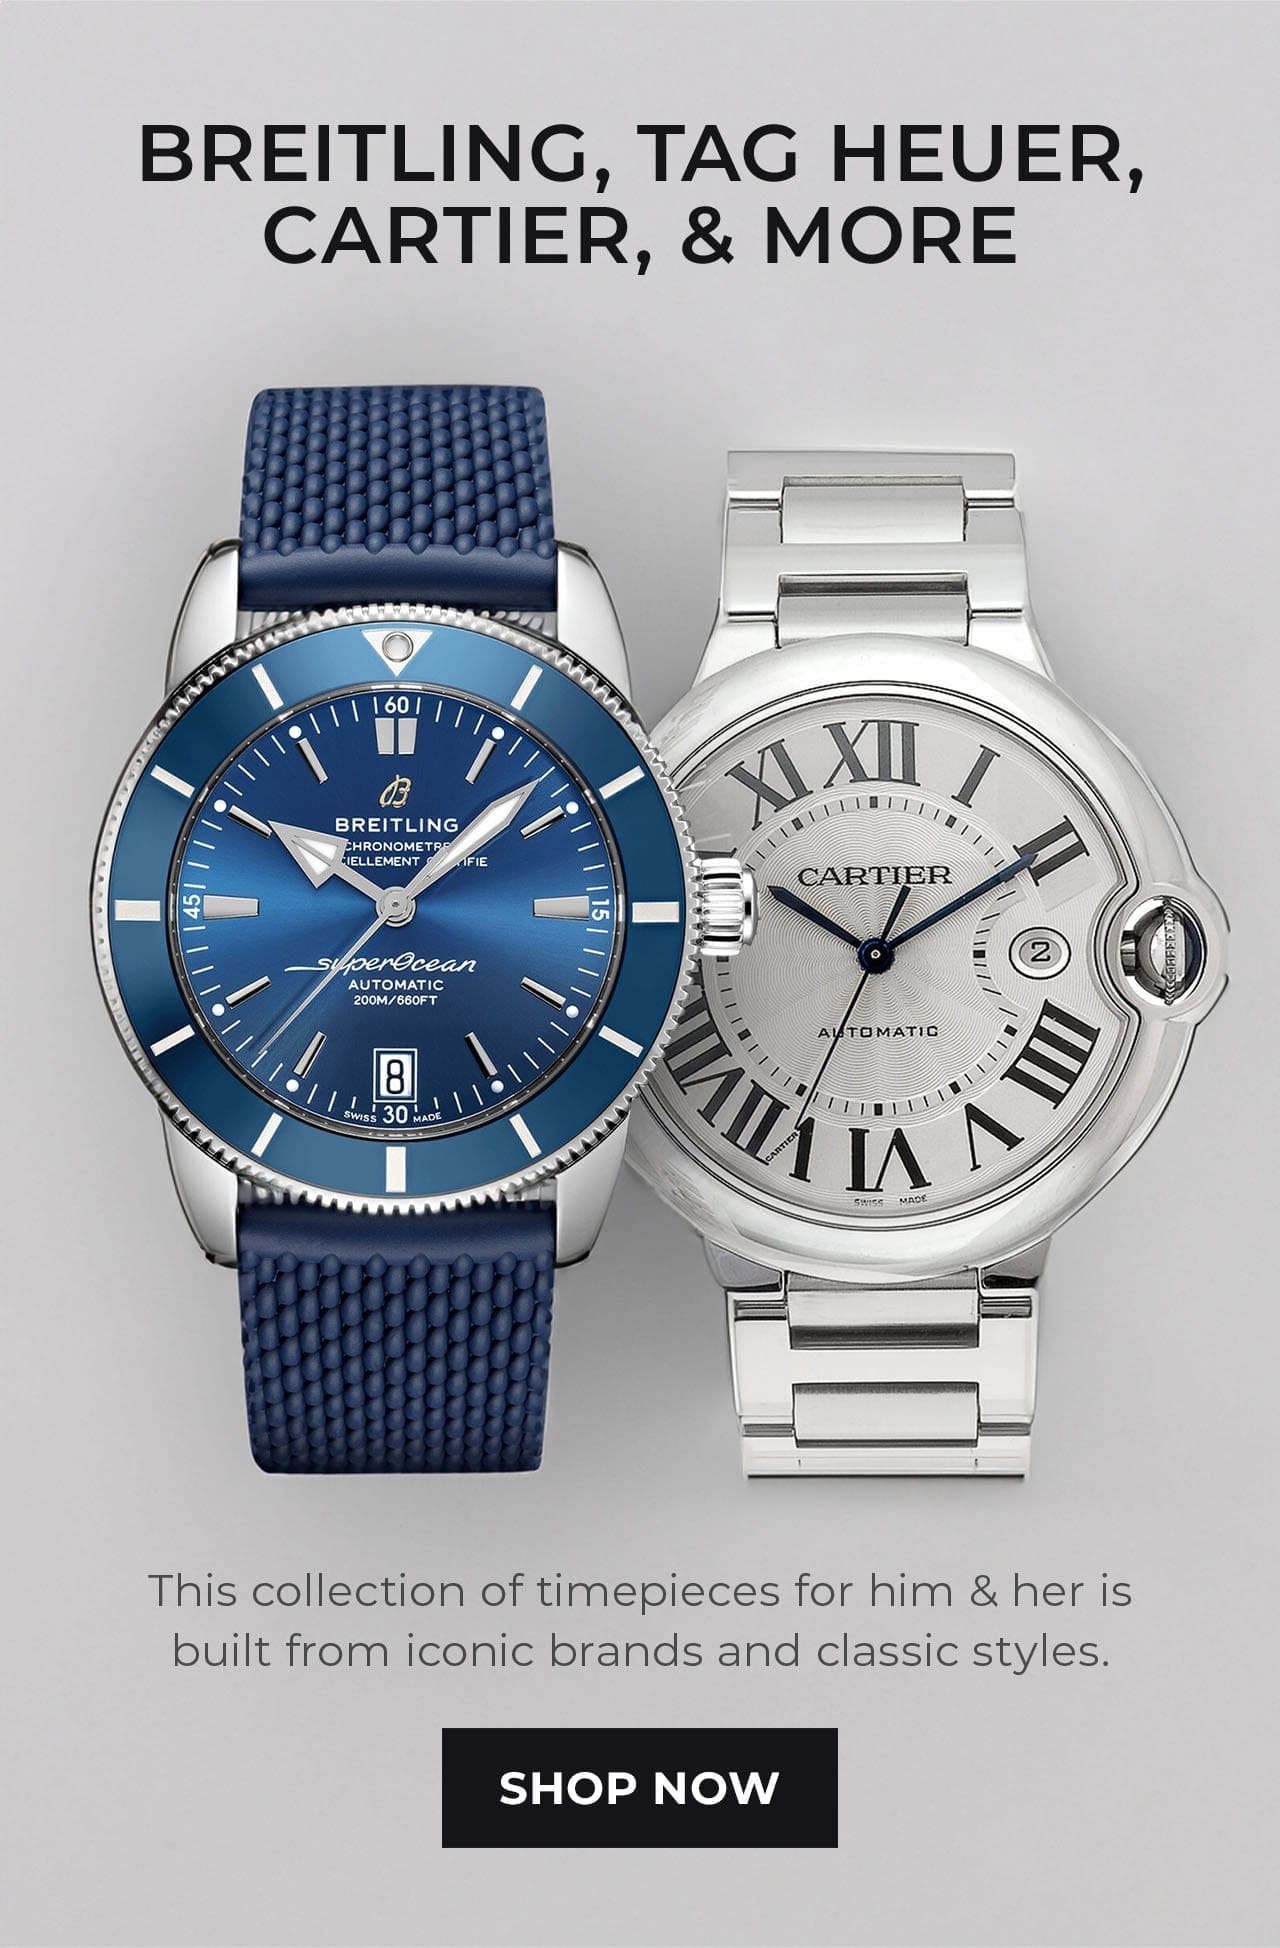 Breitling, Tag Heuer, Tissot, & More | SHOP NOW